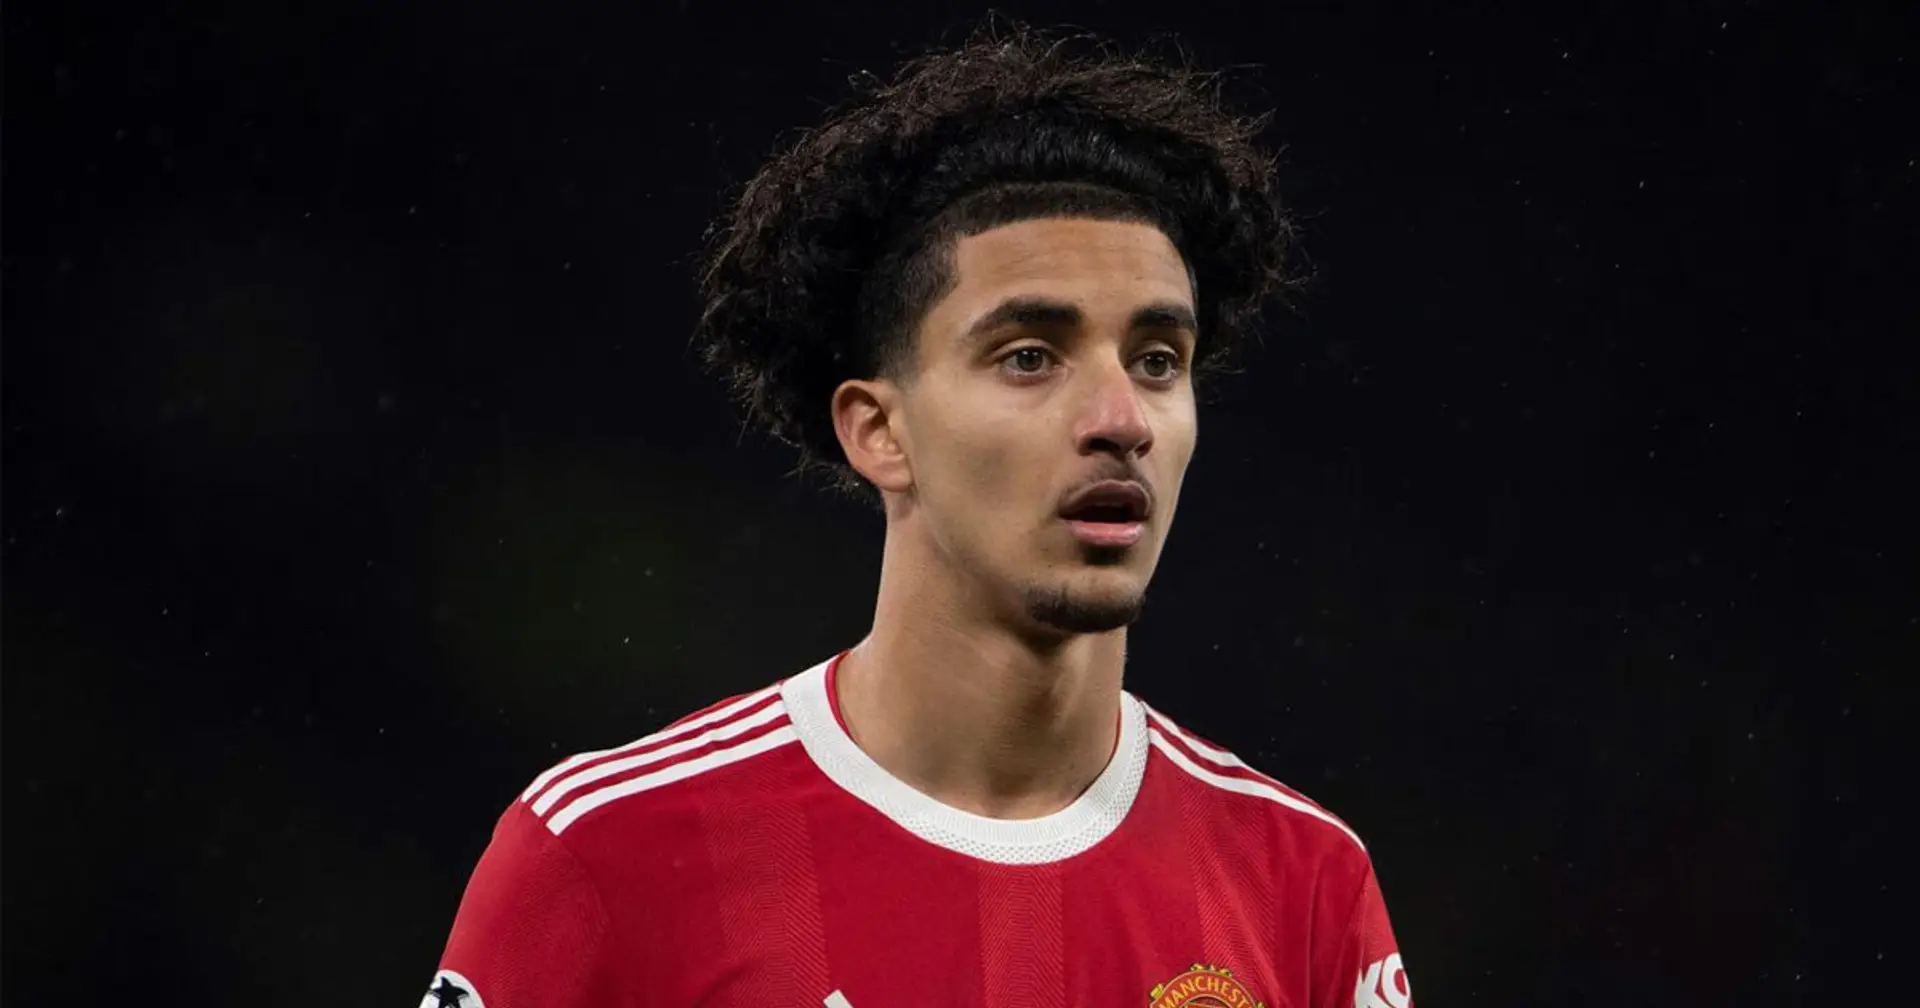 ‘Last night, I just about slept': Zidane Iqbal reacts to setting impressive record in United debut